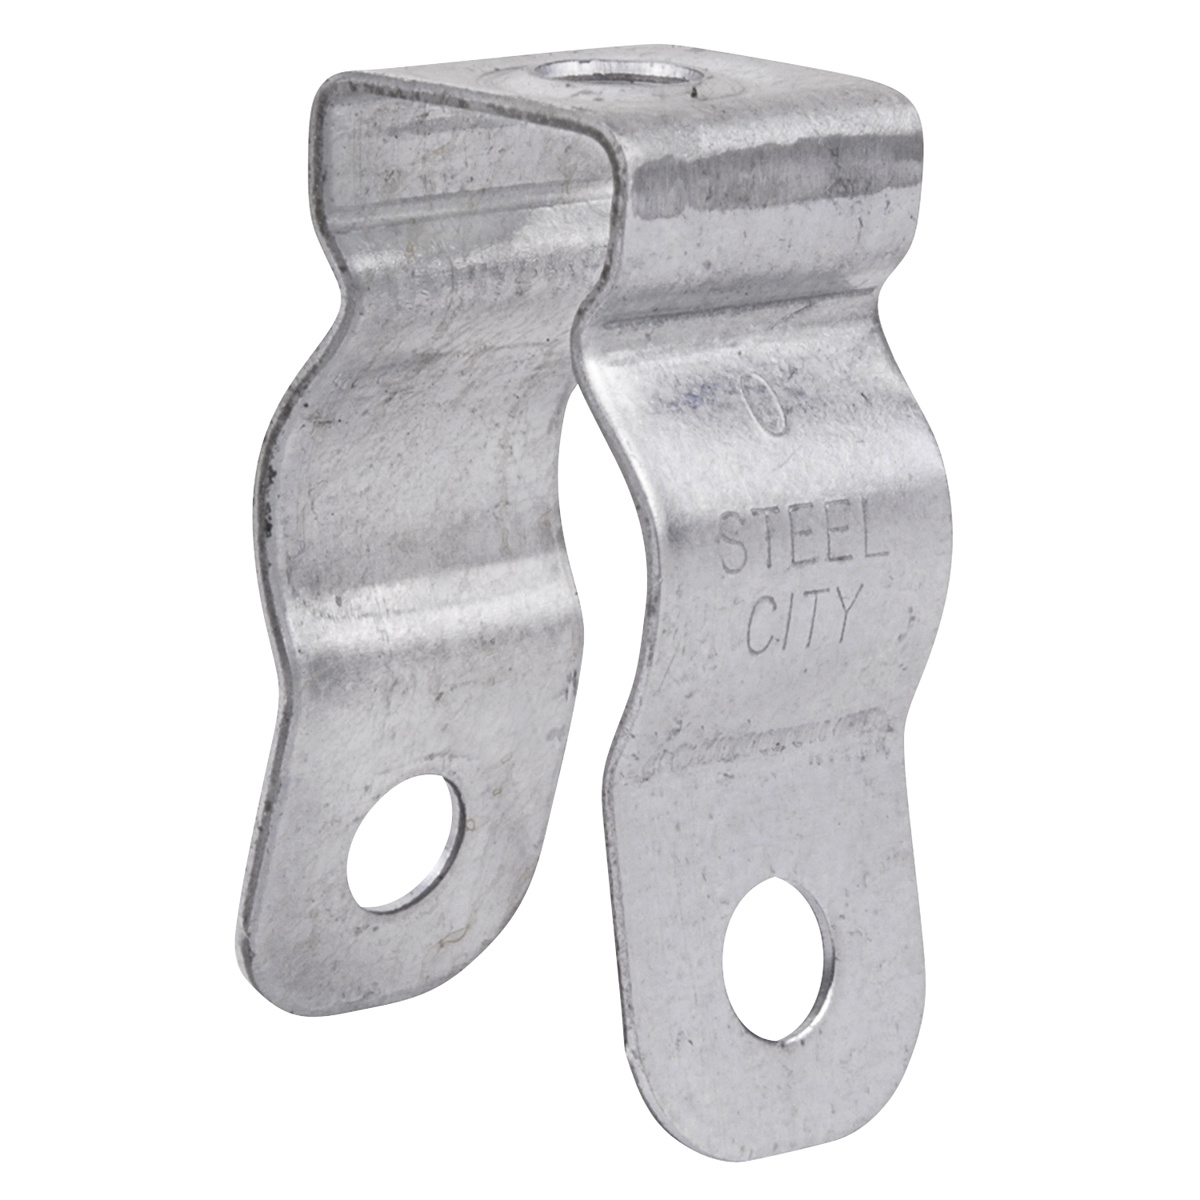 Thomas & Betts 2 Inch EMT Surface Mount Conduit Hangers from Columbia Safety